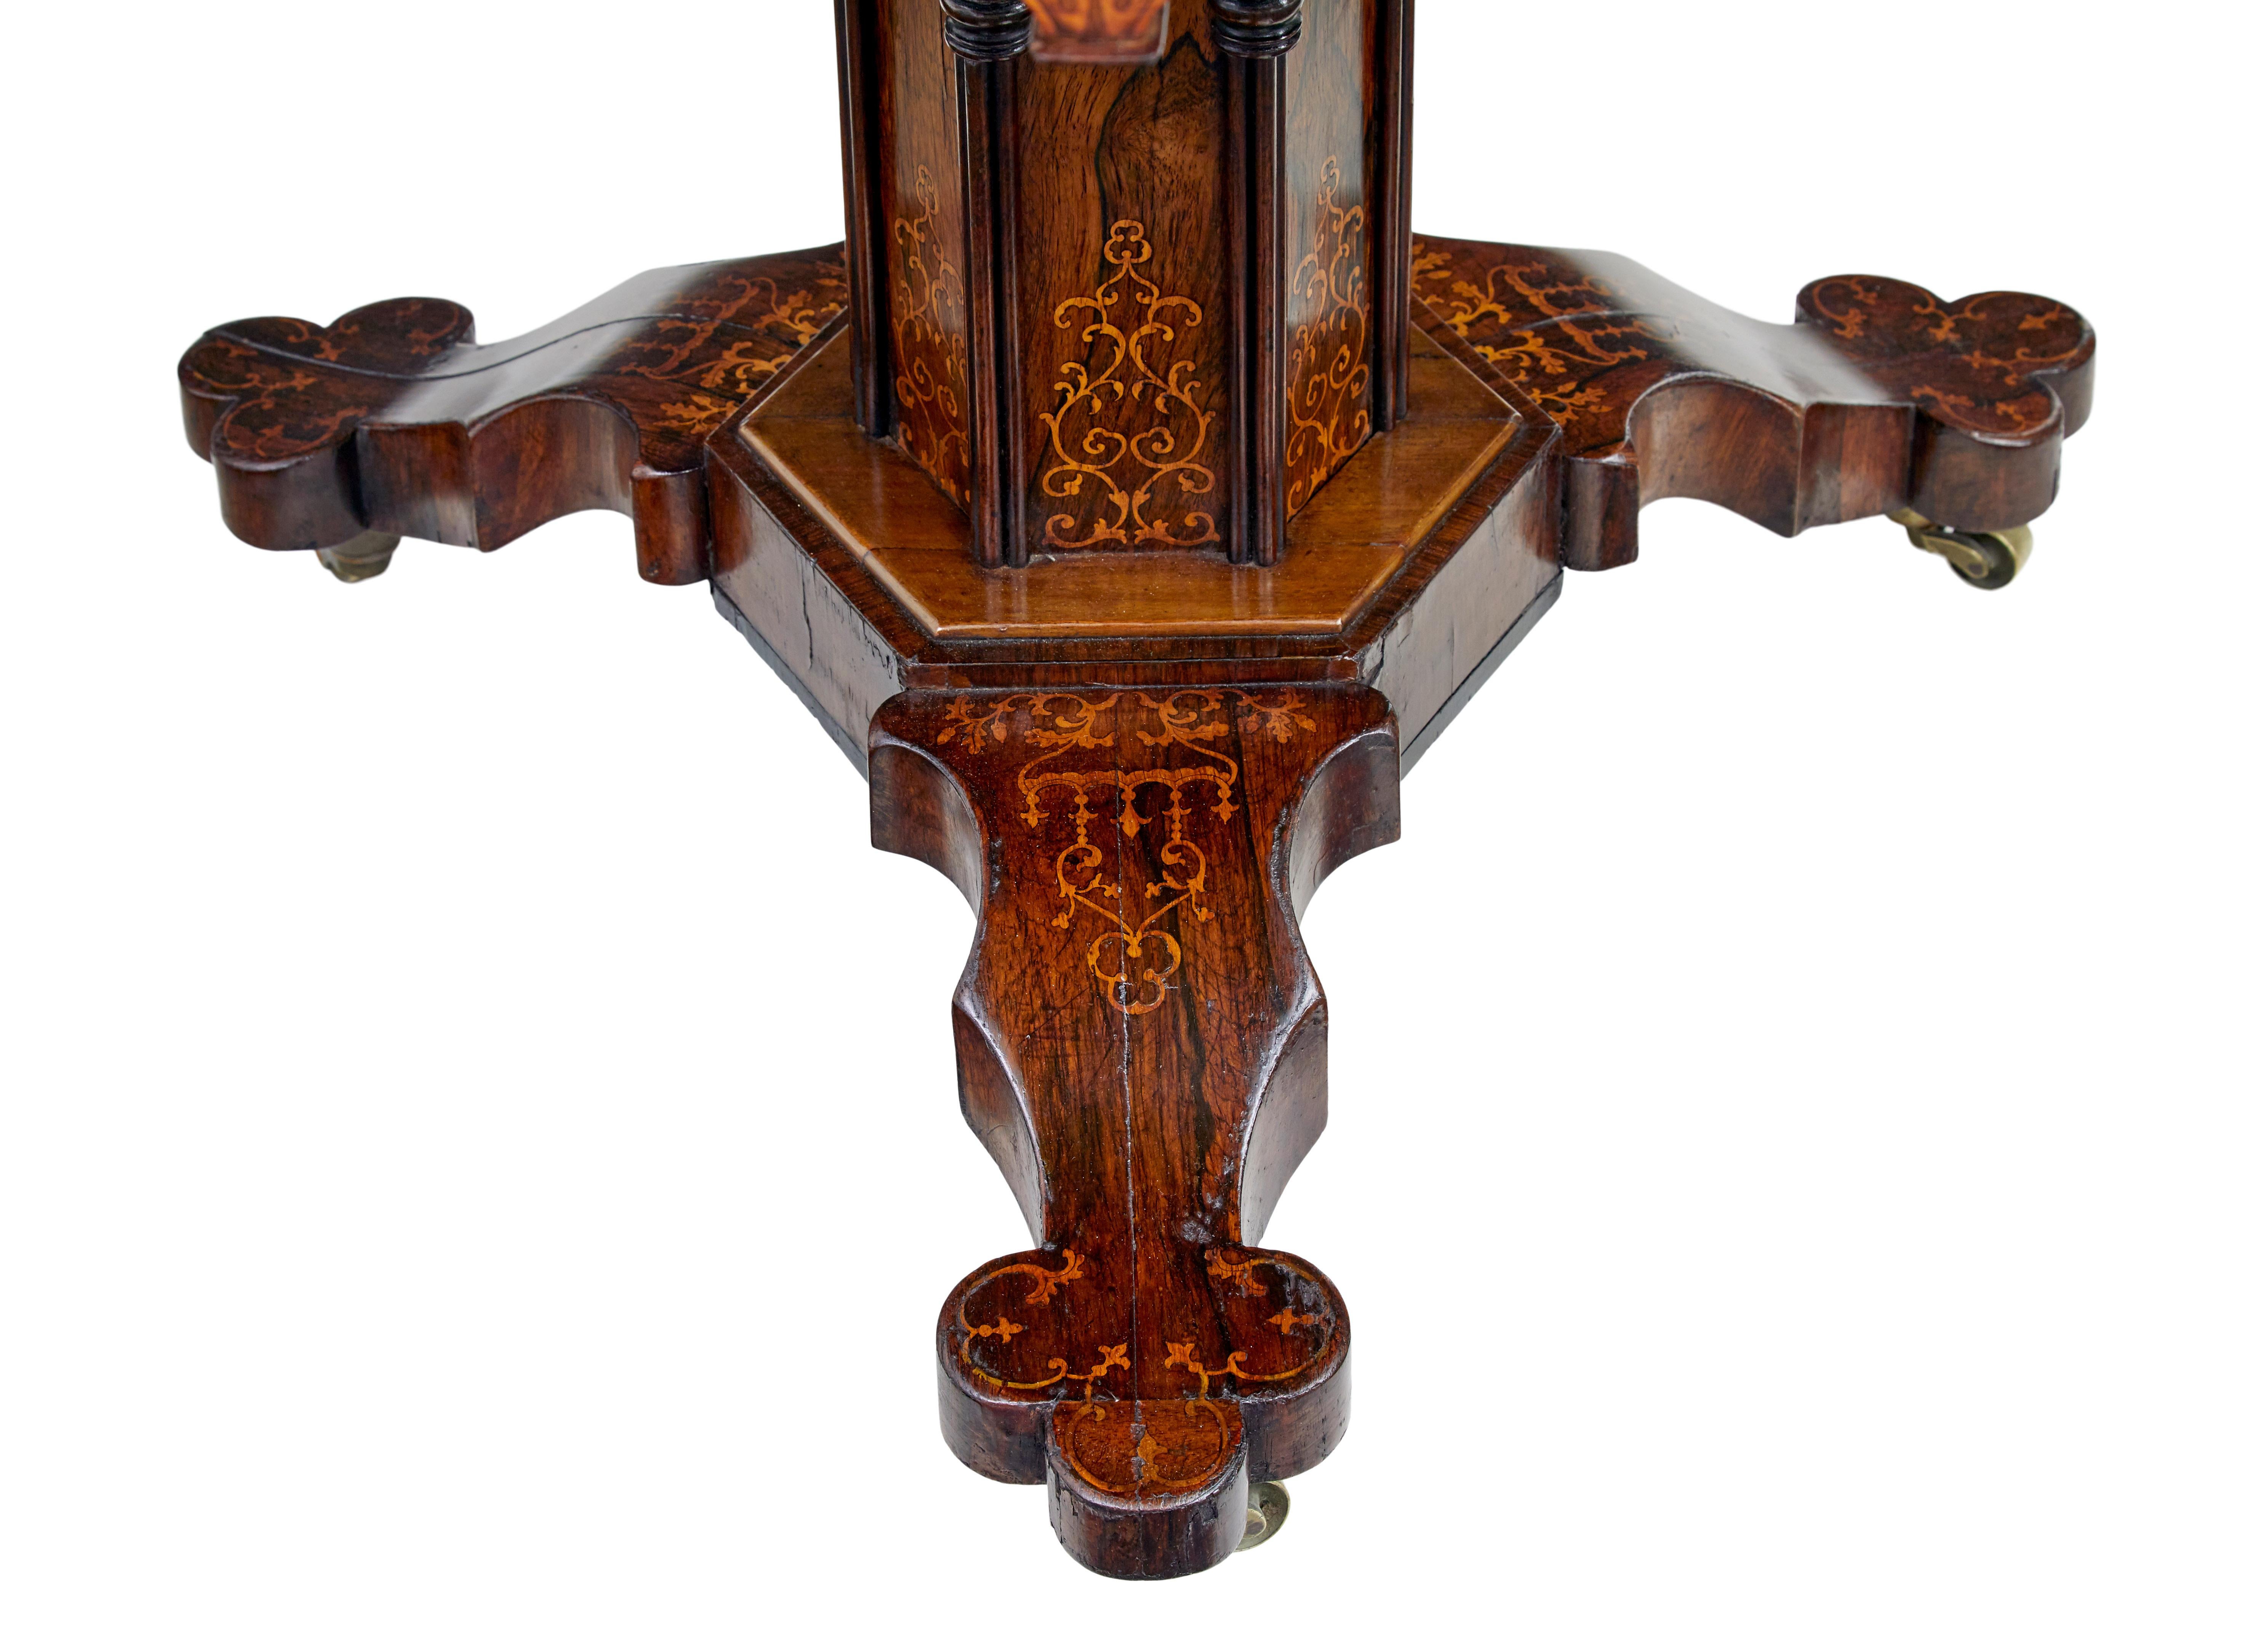 Hand-Carved 19th century French inlaid mahogany center table